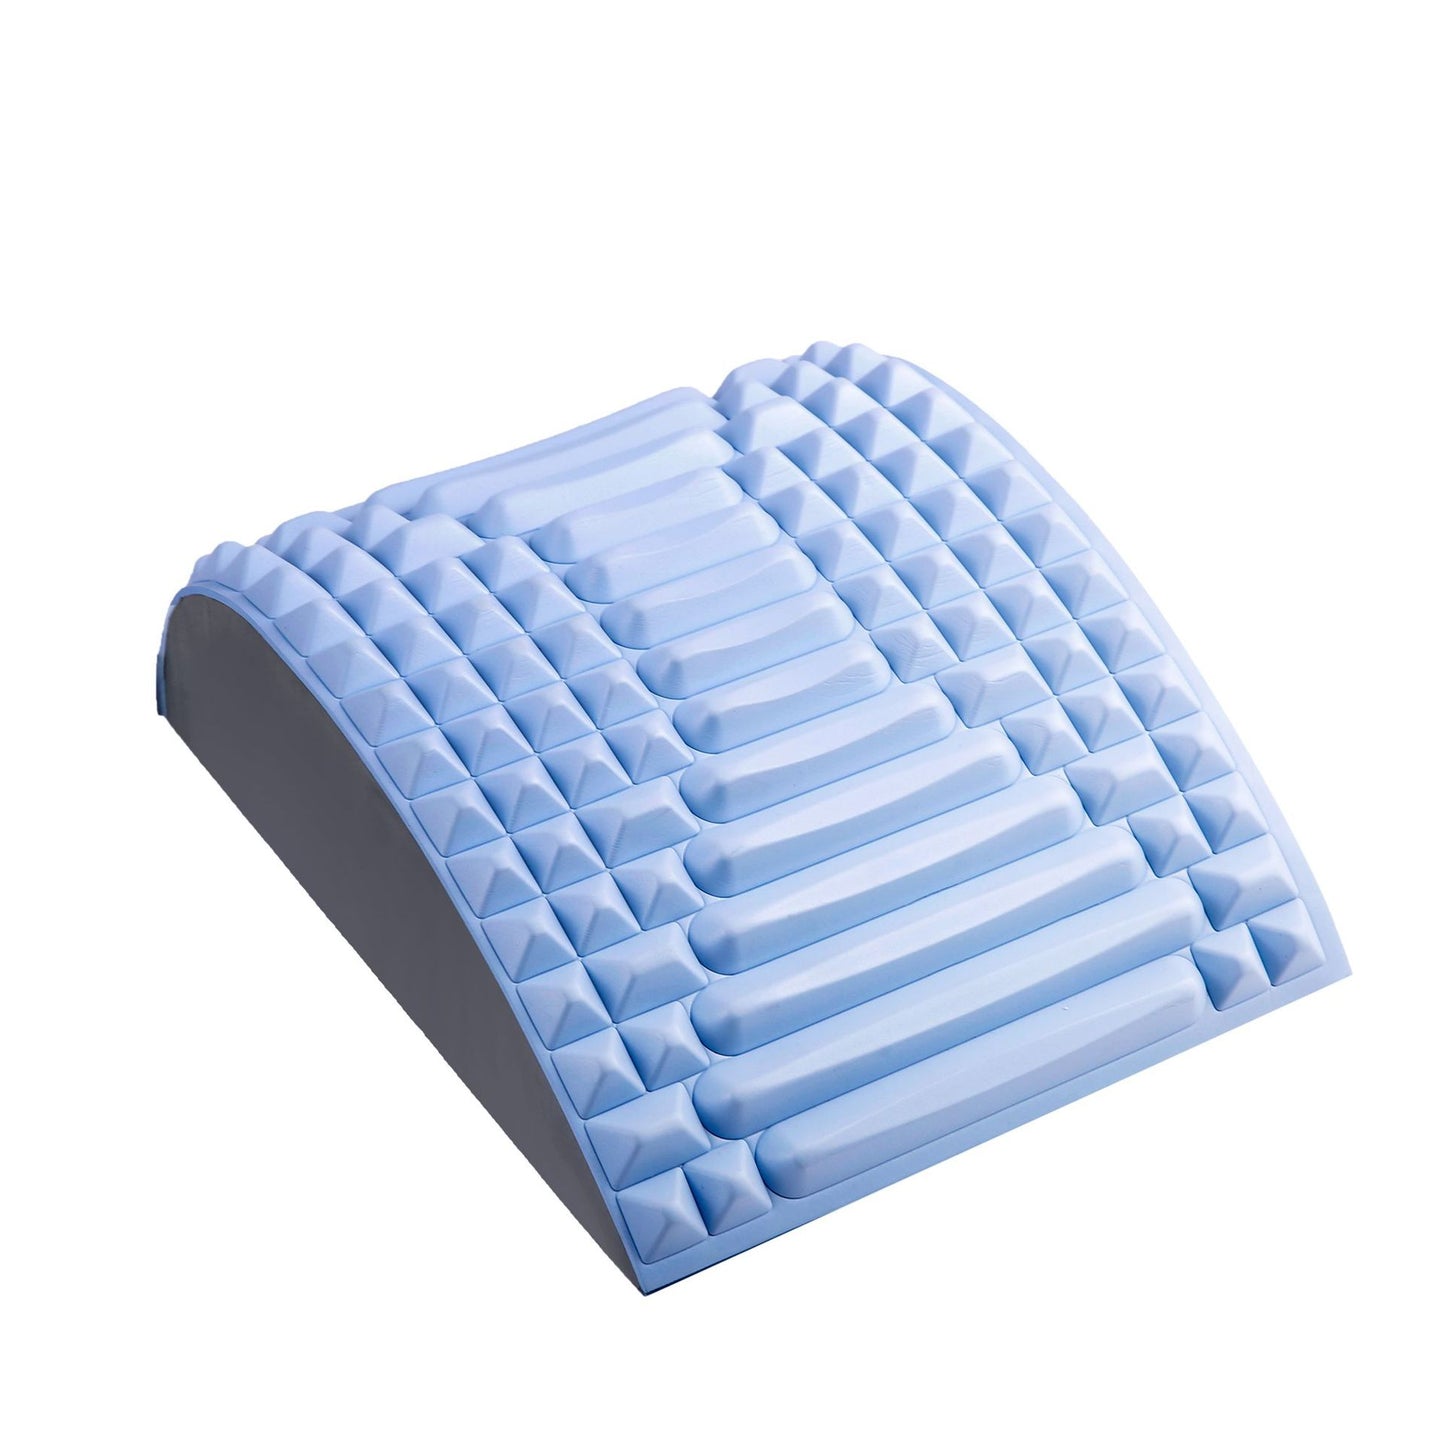 Lower Back Pain Relief Treatment Stretcher for Lumbar Support